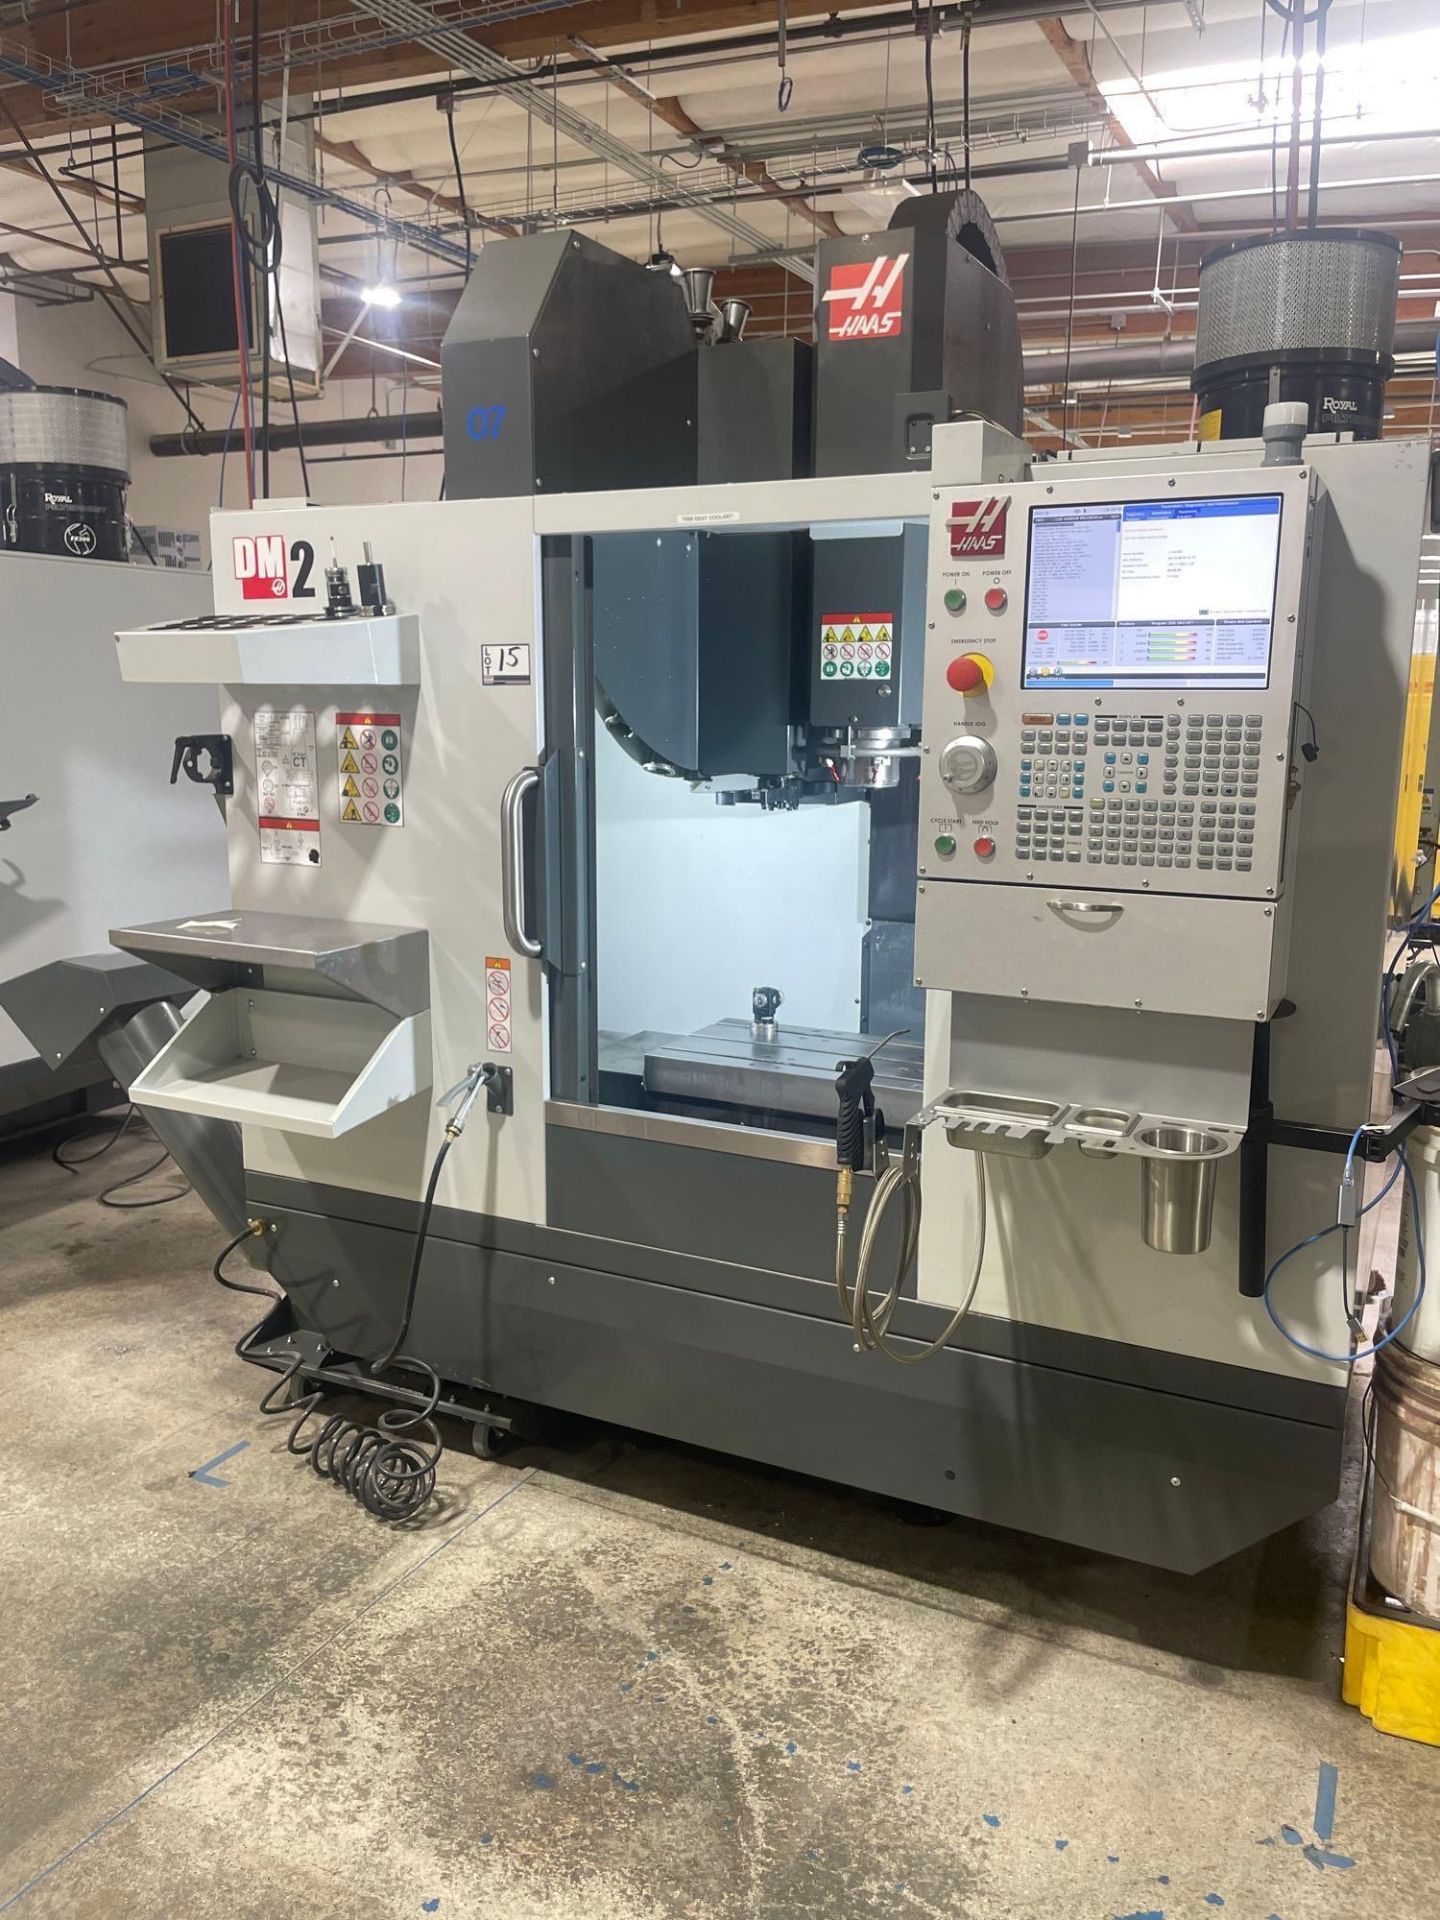 Haas DM-2, 28” x 16” x 15.5” Travels, CT 40, 18+1 SMTC, CTS, WIPS, as New as 2021 - Image 2 of 12